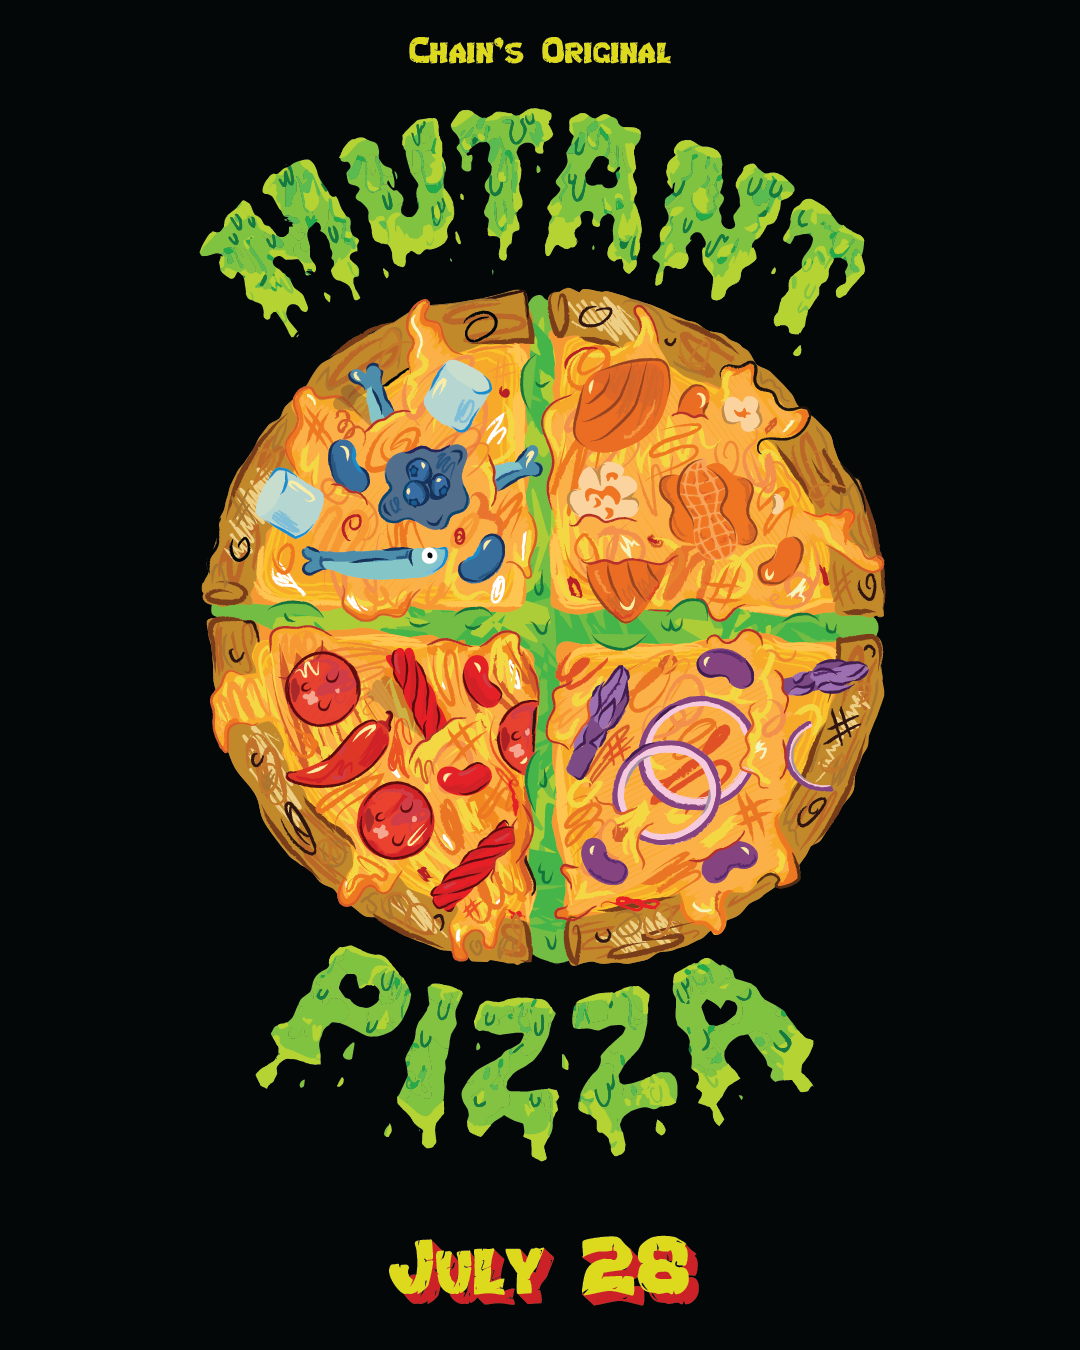 The Mutant Pizza (Paramount Guest)